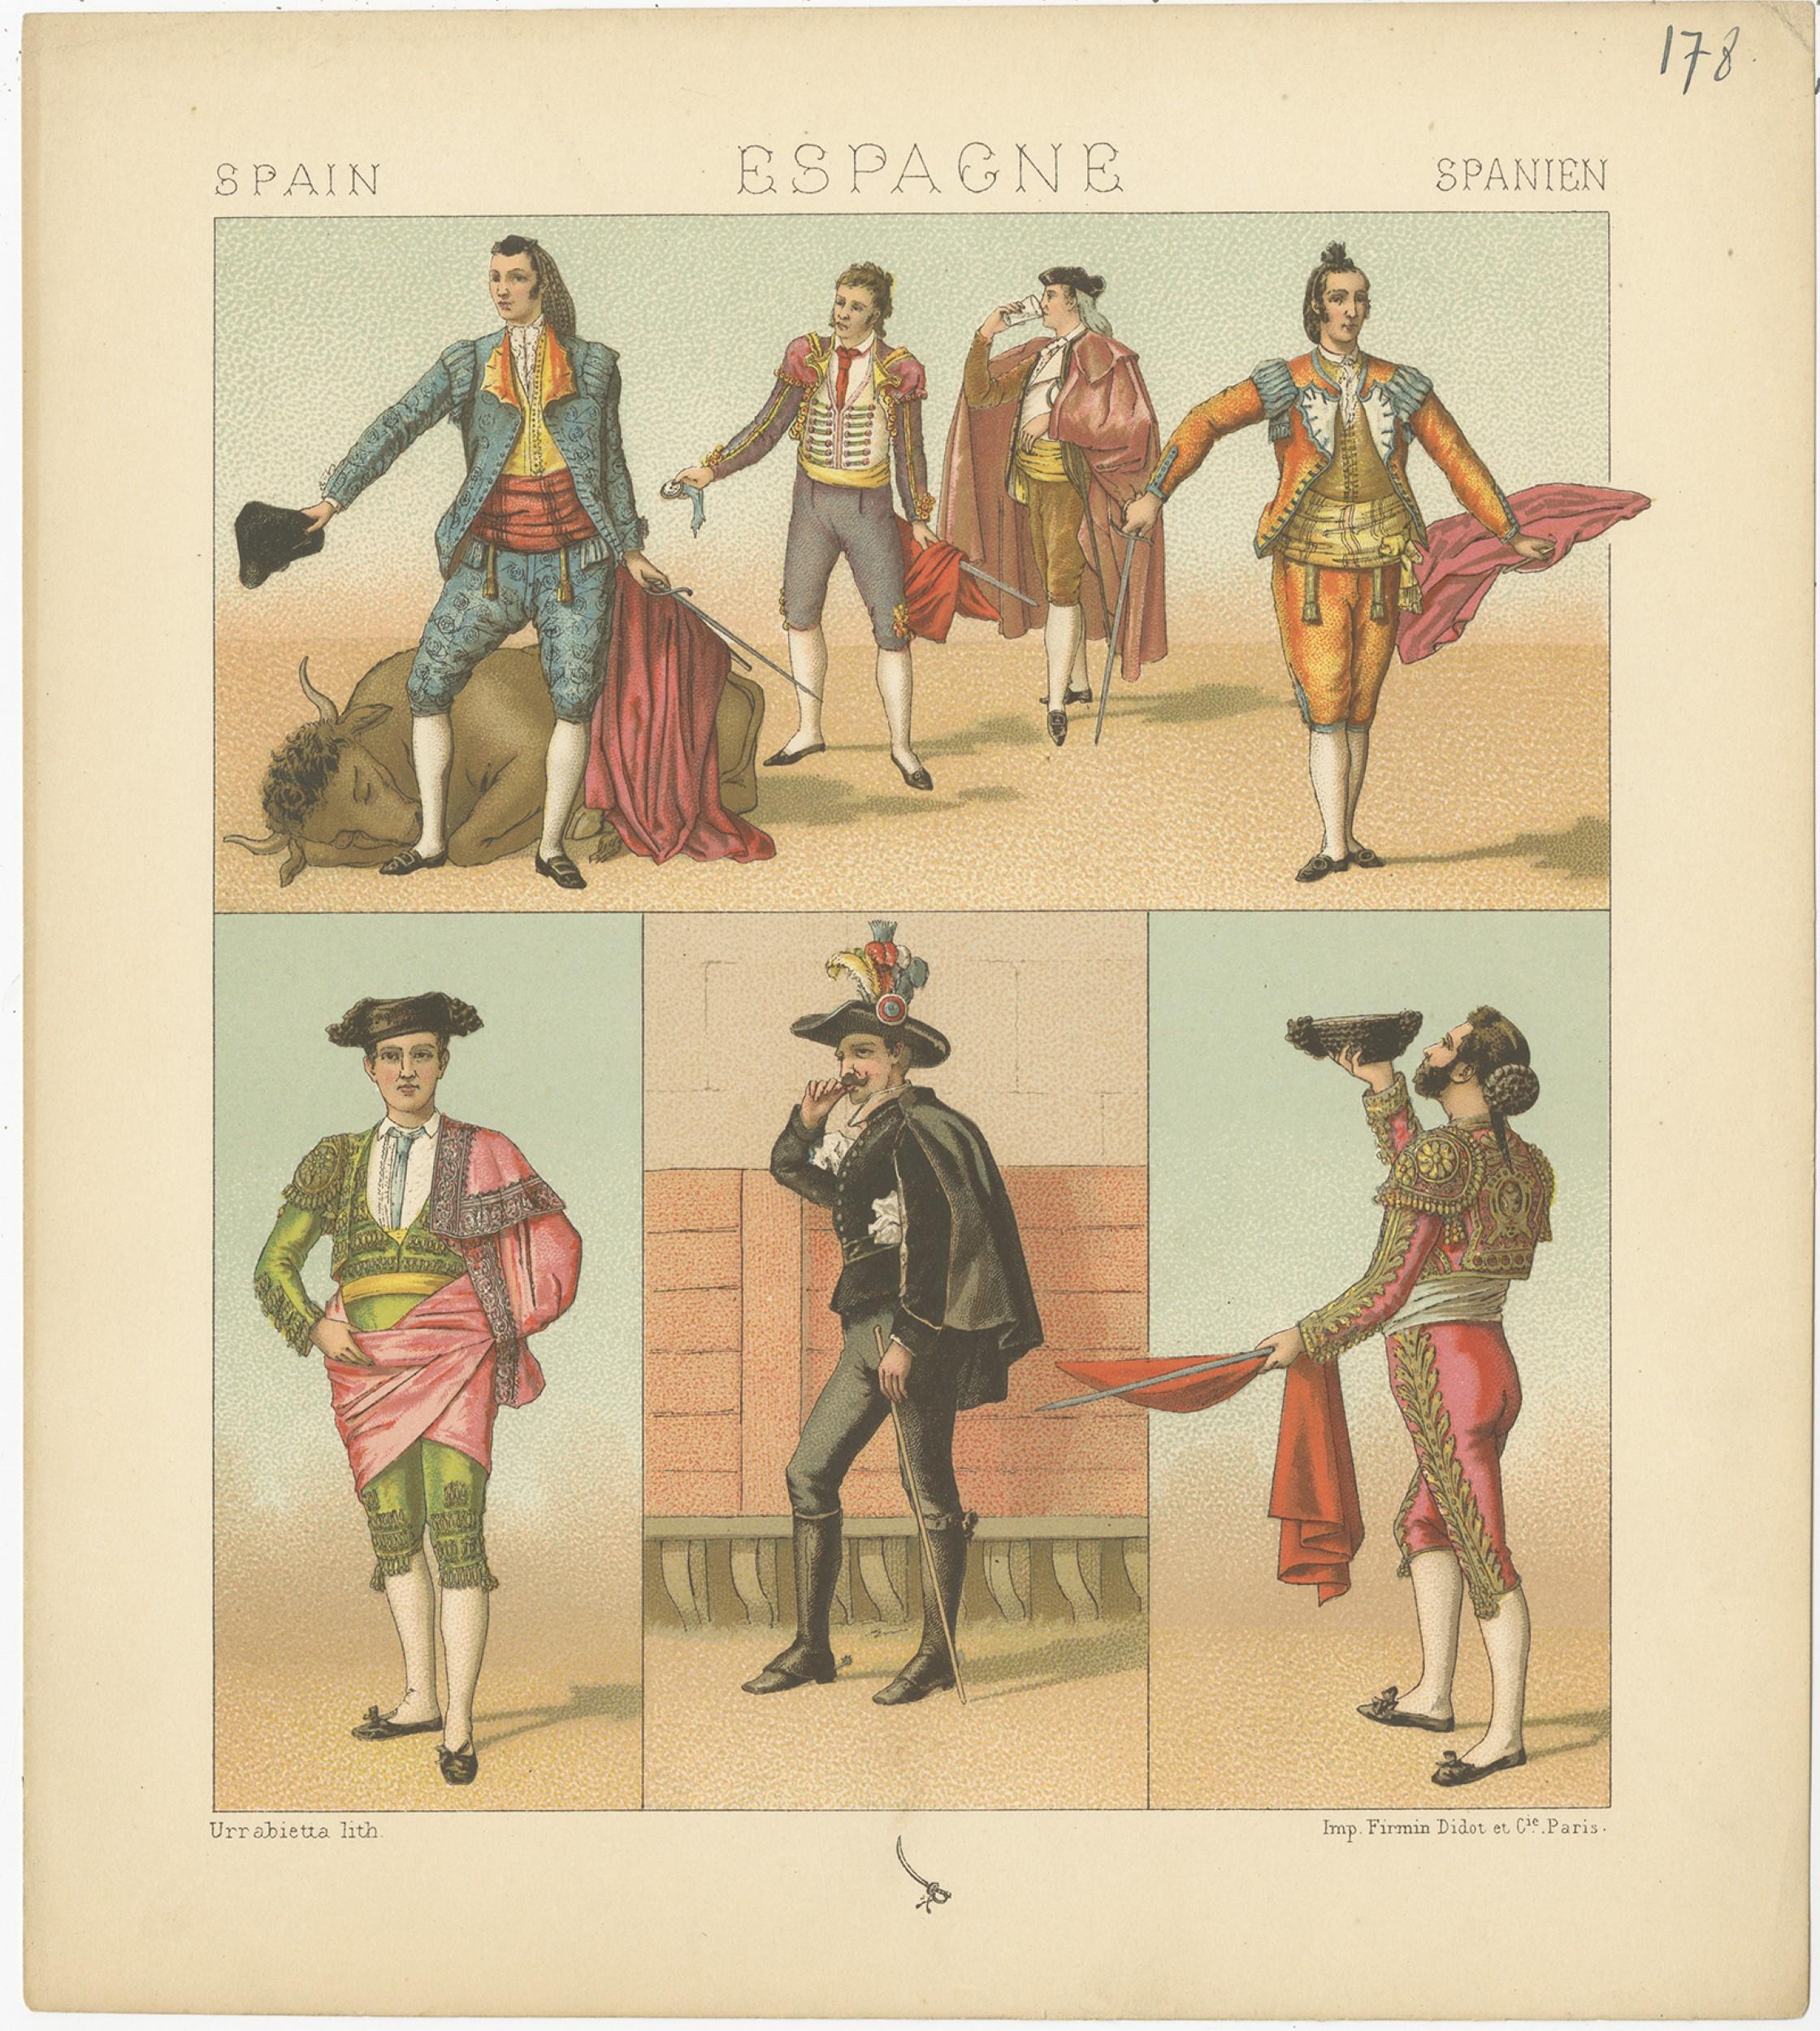 Antique print titled 'Spain - Espagne - Spanien'. Chromolithograph of Spanish Bullfighting costumes. This print originates from 'Le Costume Historique' by M.A. Racinet. Published, circa 1880.
    
    